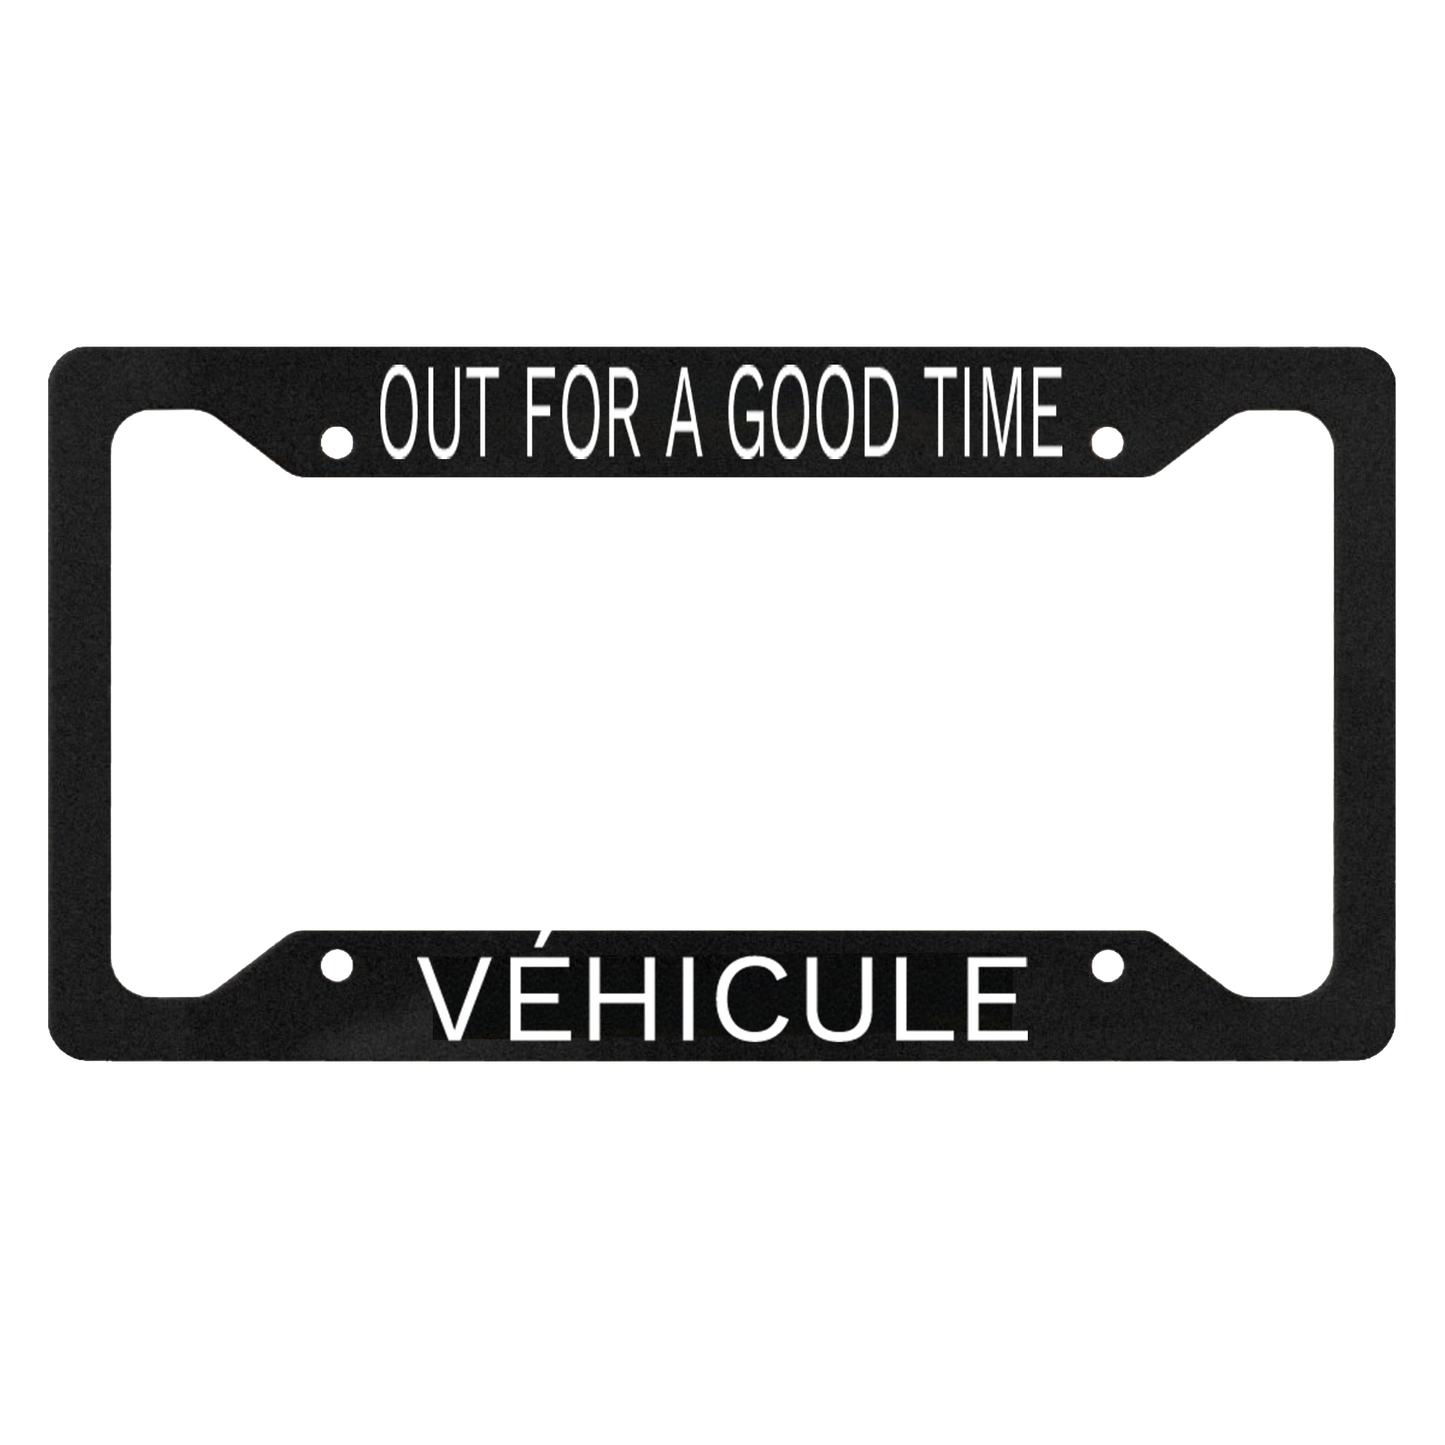 OUT FOR A GOOD TIME MERCH LICENCE PLATE FRAME